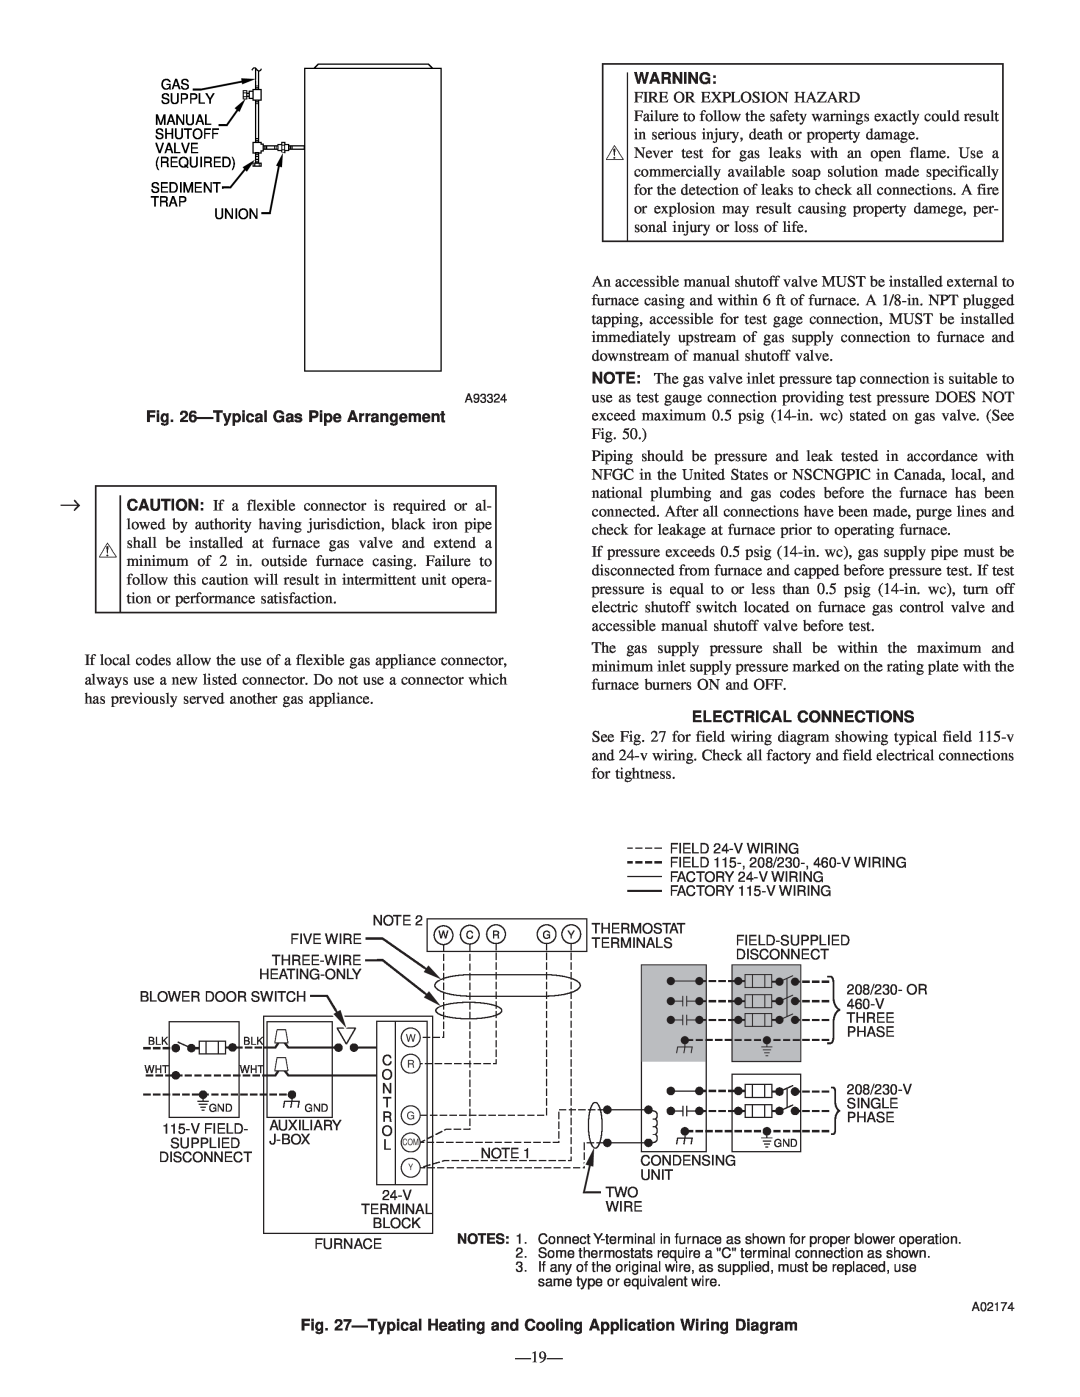 Bryant 340MAV instruction manual TypicalGas Pipe Arrangement, Electrical Connections 